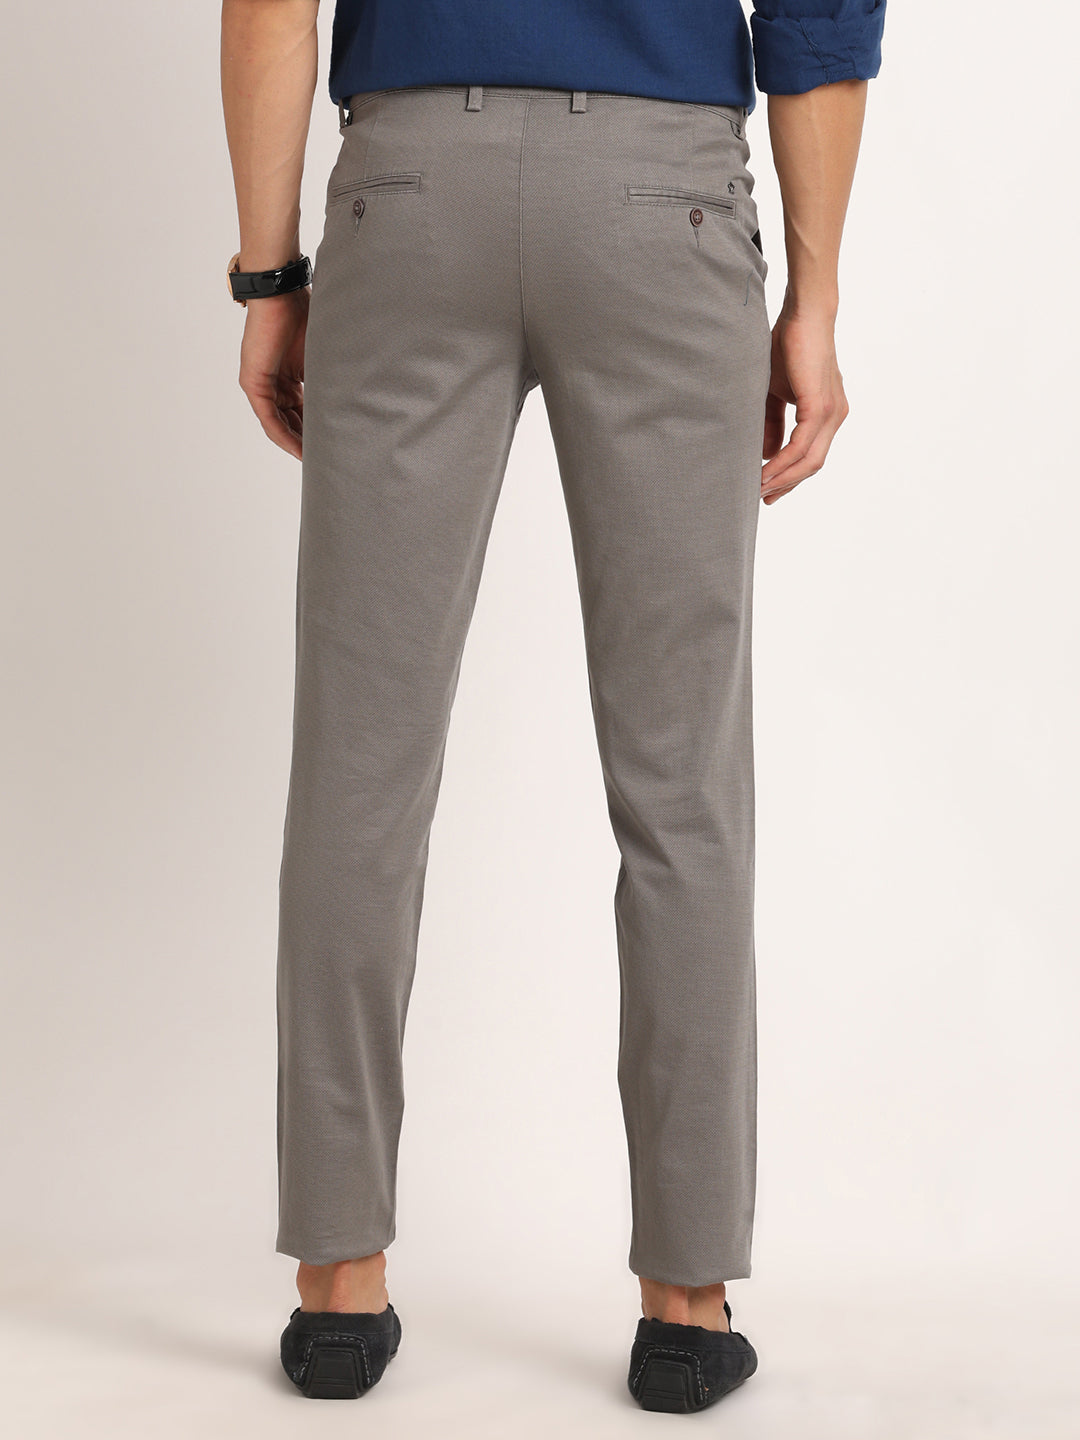 Cotton Stretch Grey Dobby Narrow Fit Flat Front Casual Trouser